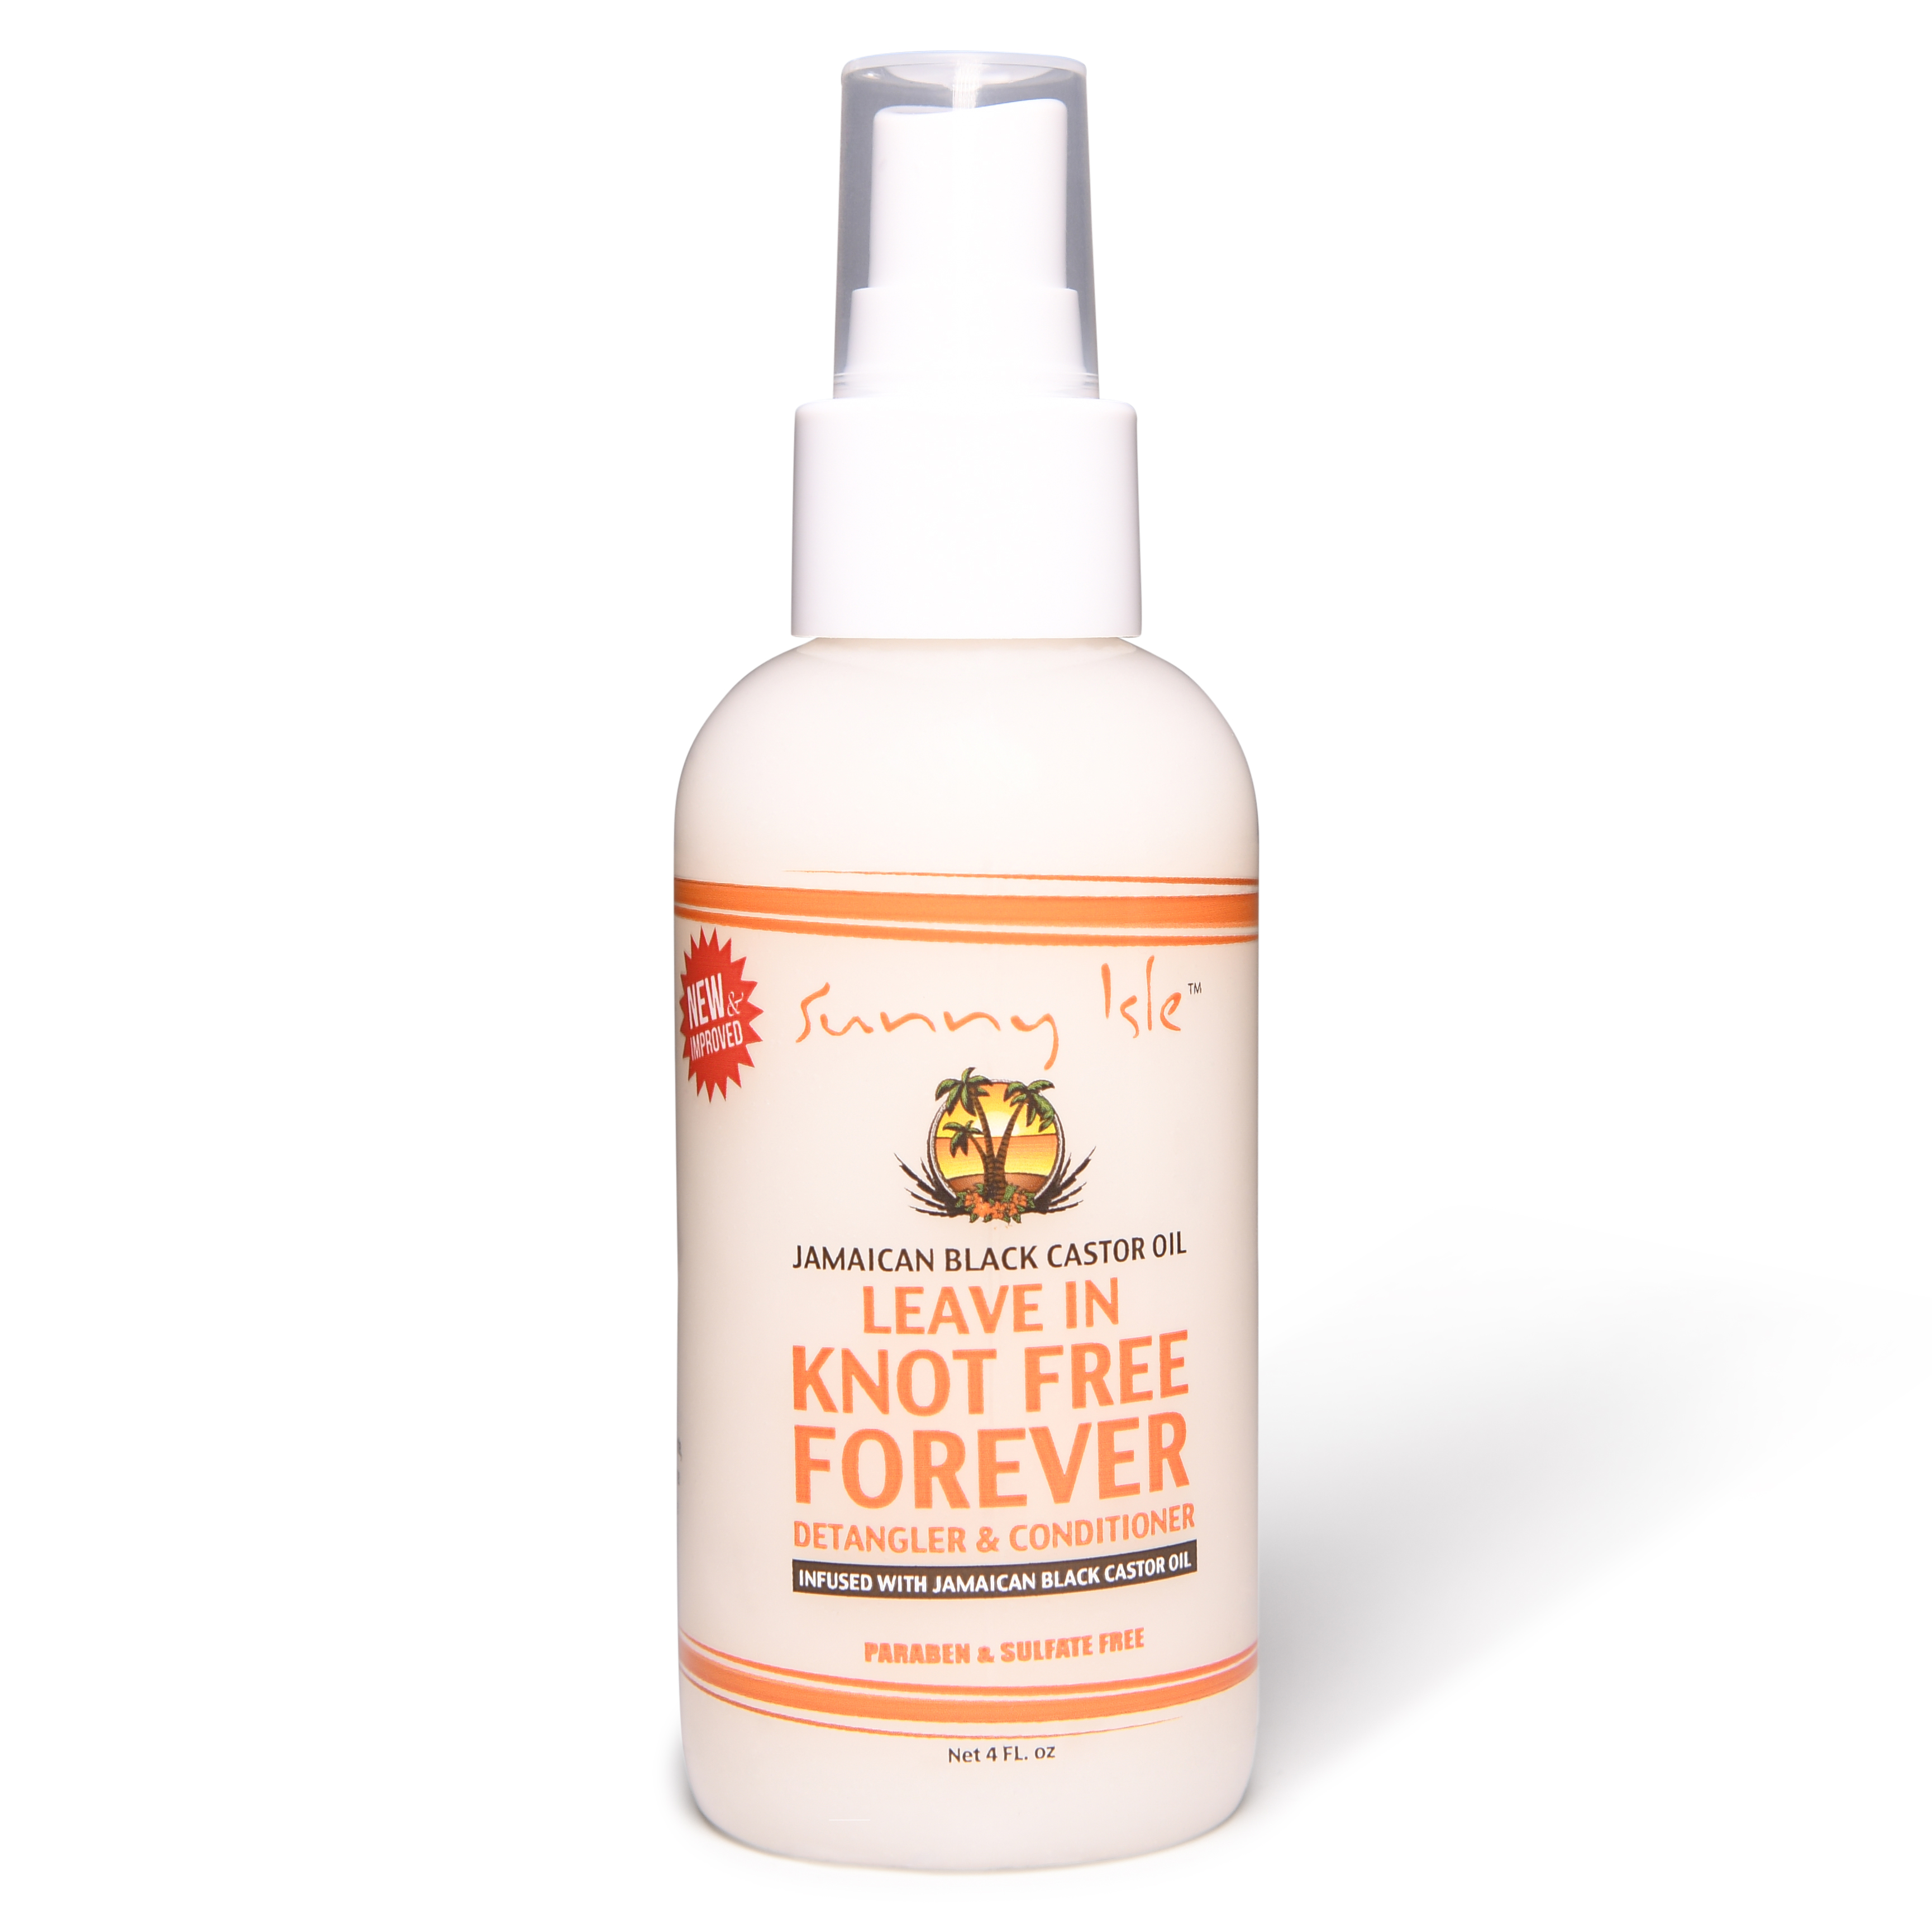 Sunny Isle Knot Free Forever Leave In Conditioner 4oz - image 1 of 2